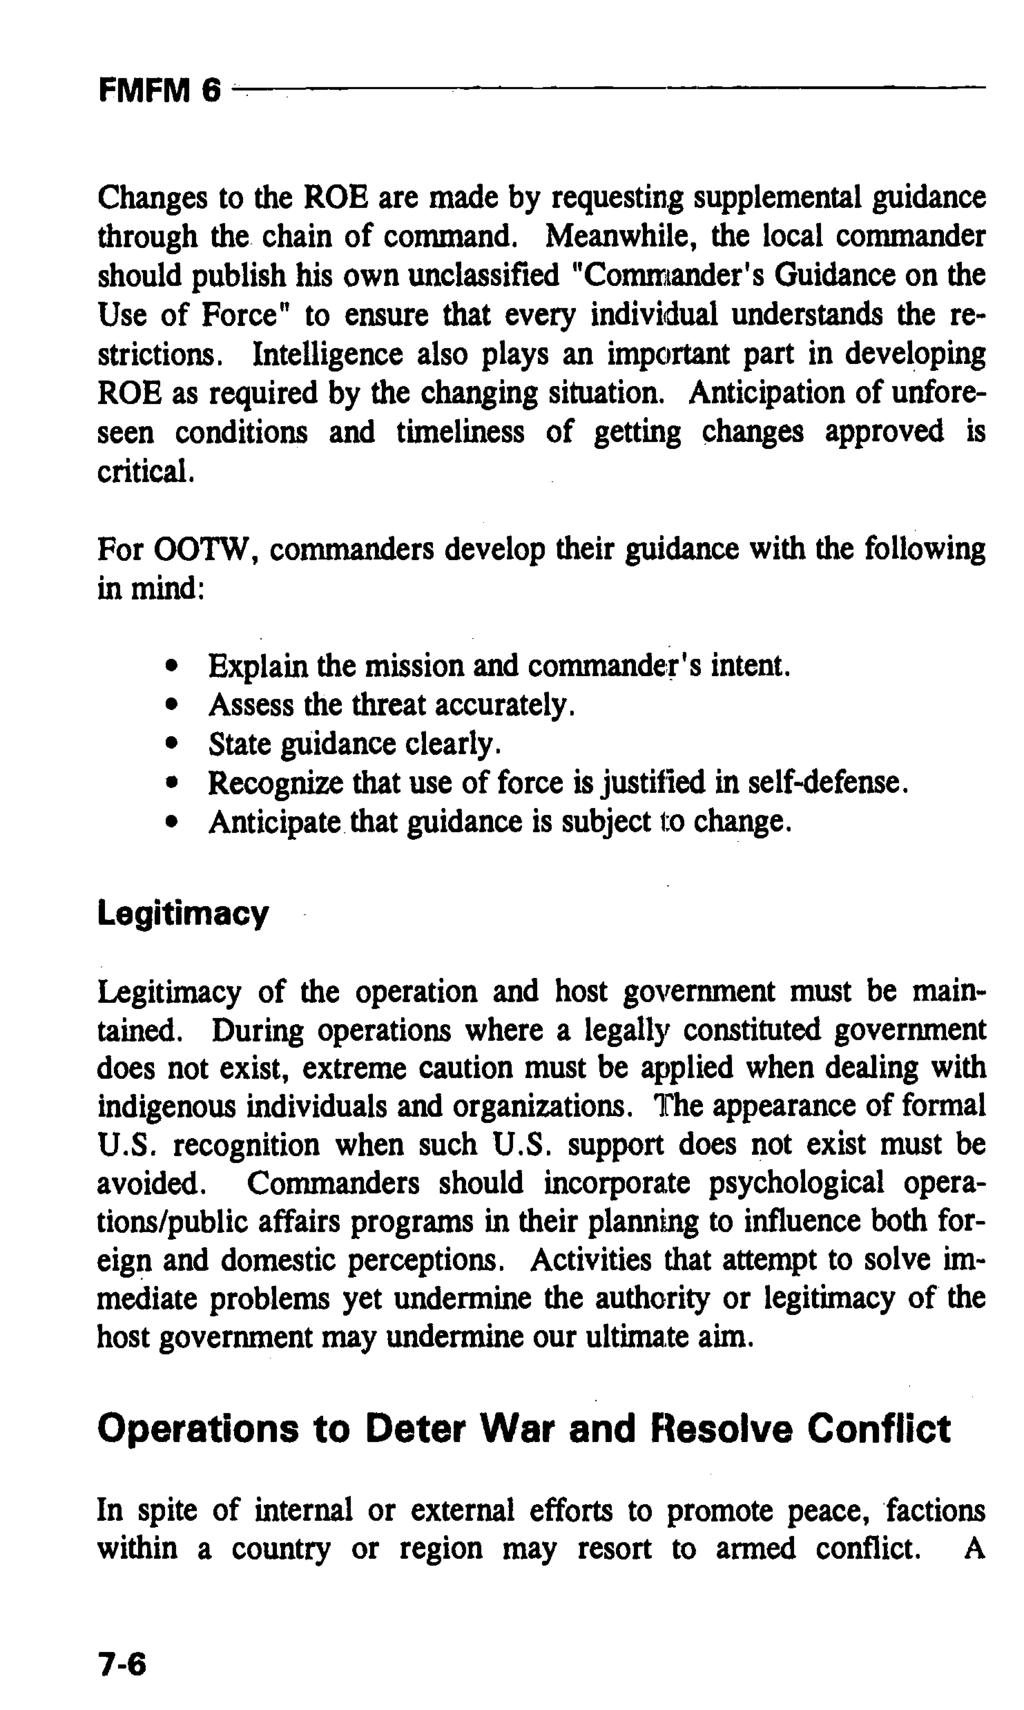 FMFM6. Changes to the ROE are made by requesting supplemental guidance through the chain of command.